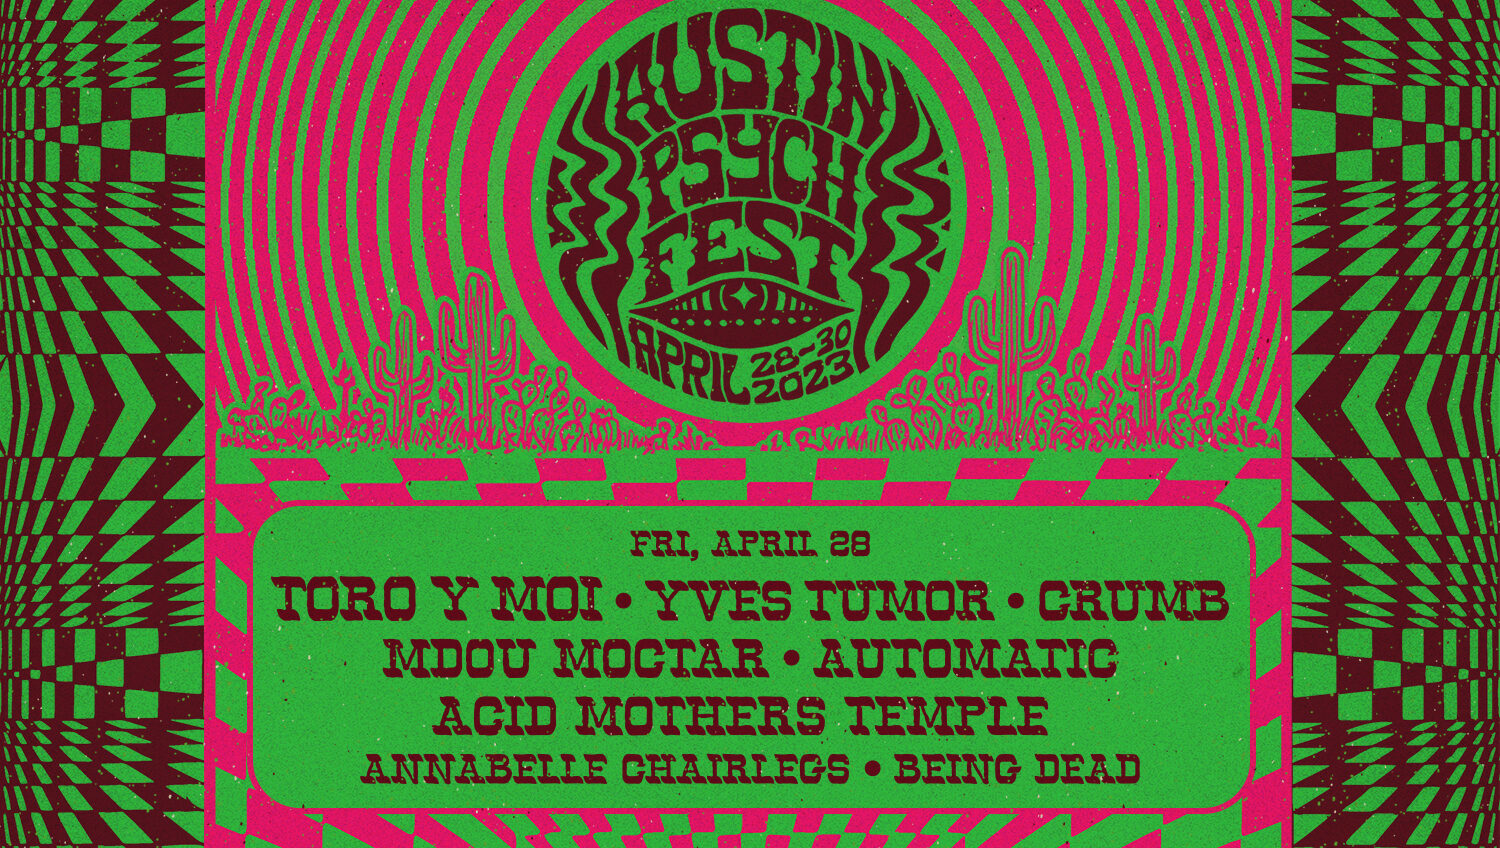 Live music preview Austin Psych Fest returns for 15th Anniversary at